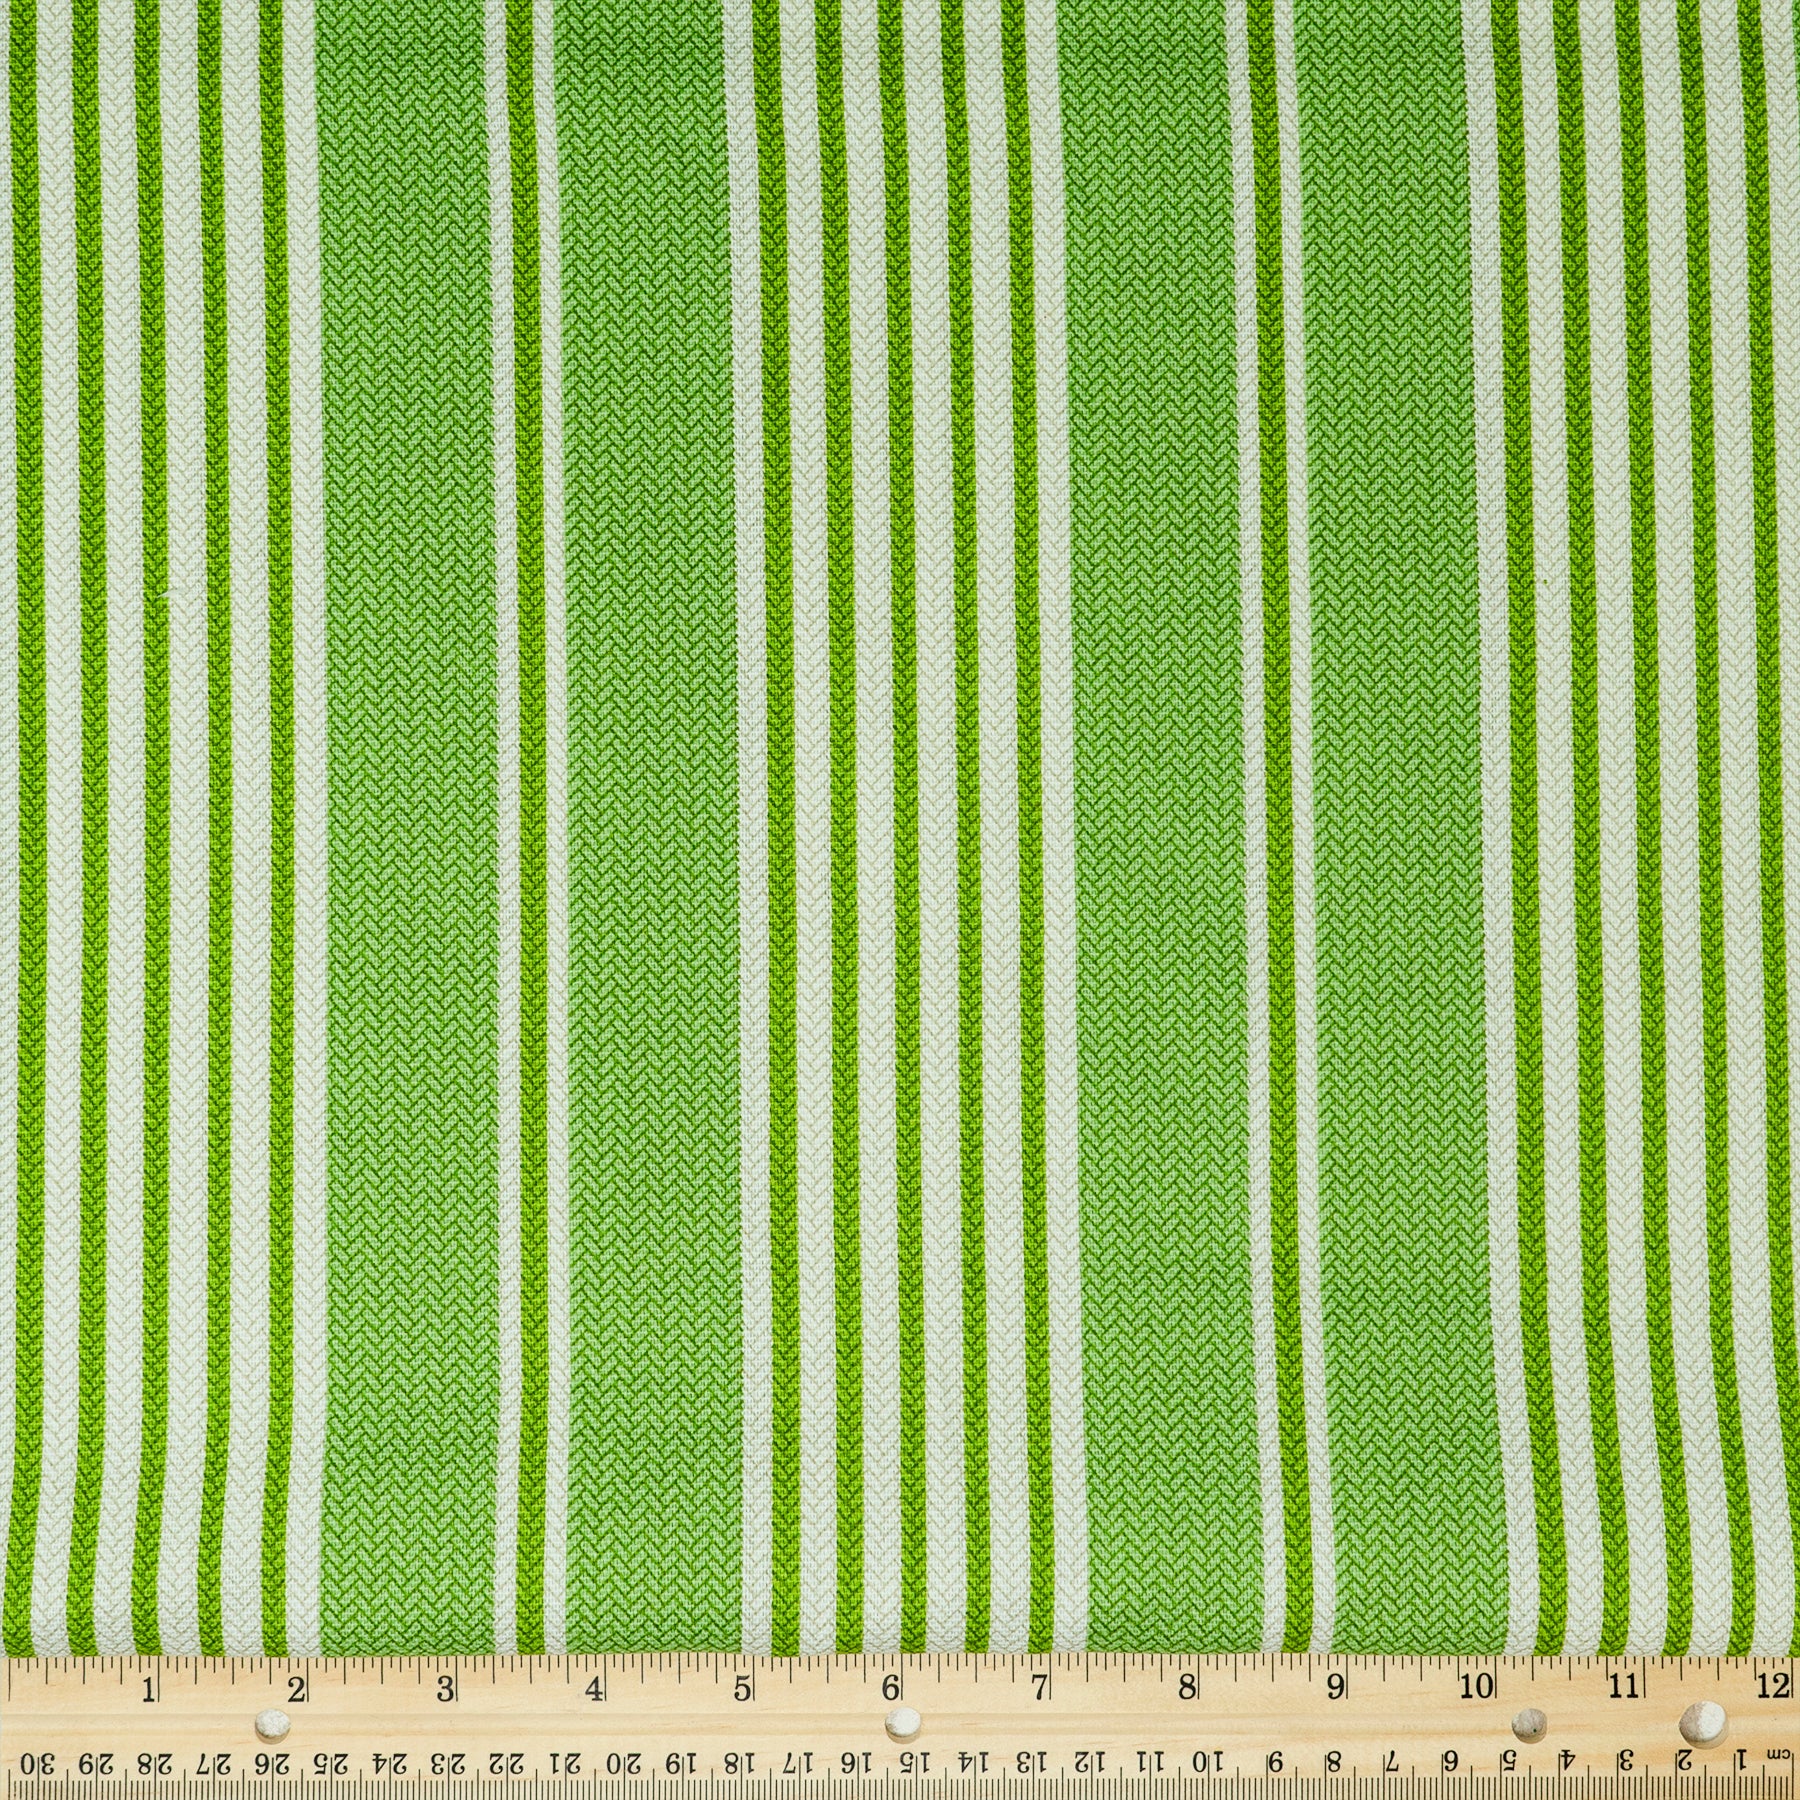 Waverly Inspirations 100% Cotton Duck 45" Width Texture Stripe Bright Green Color Sewing Fabric by the Yard